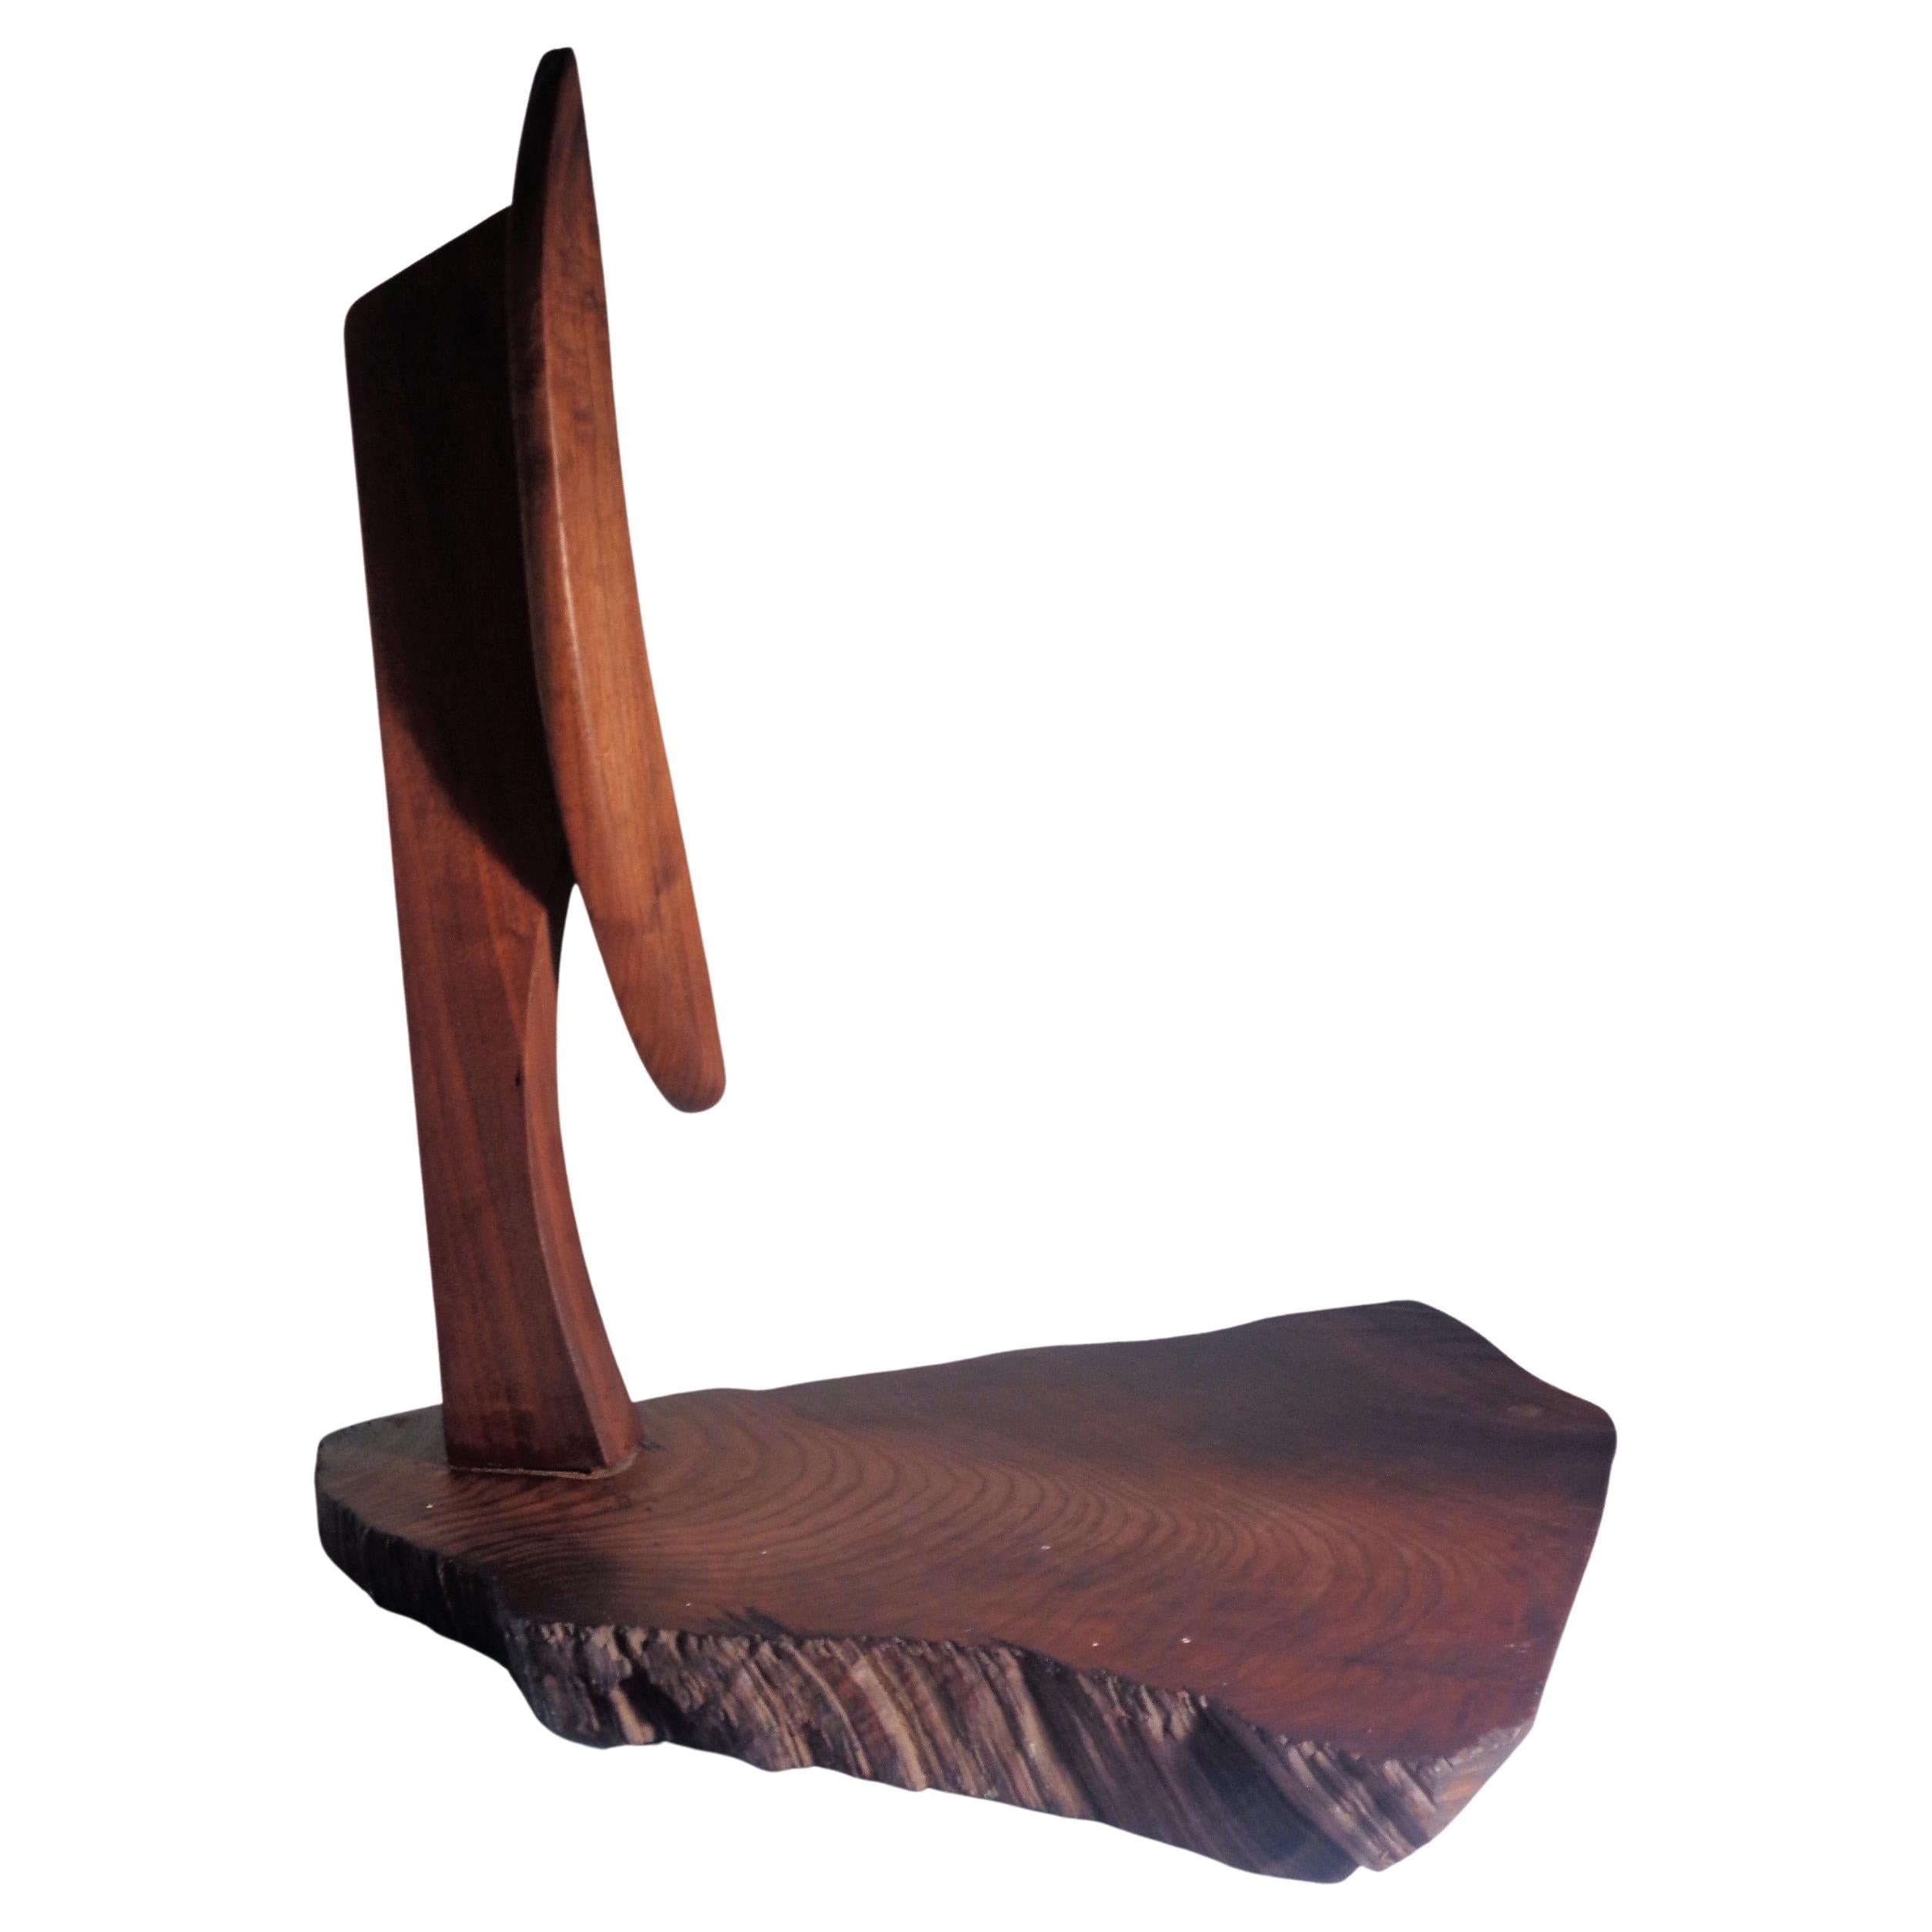 American Craftsman American Studio Craft Movement Modernist Abstract Wood Sculpture, 1970-1980 For Sale